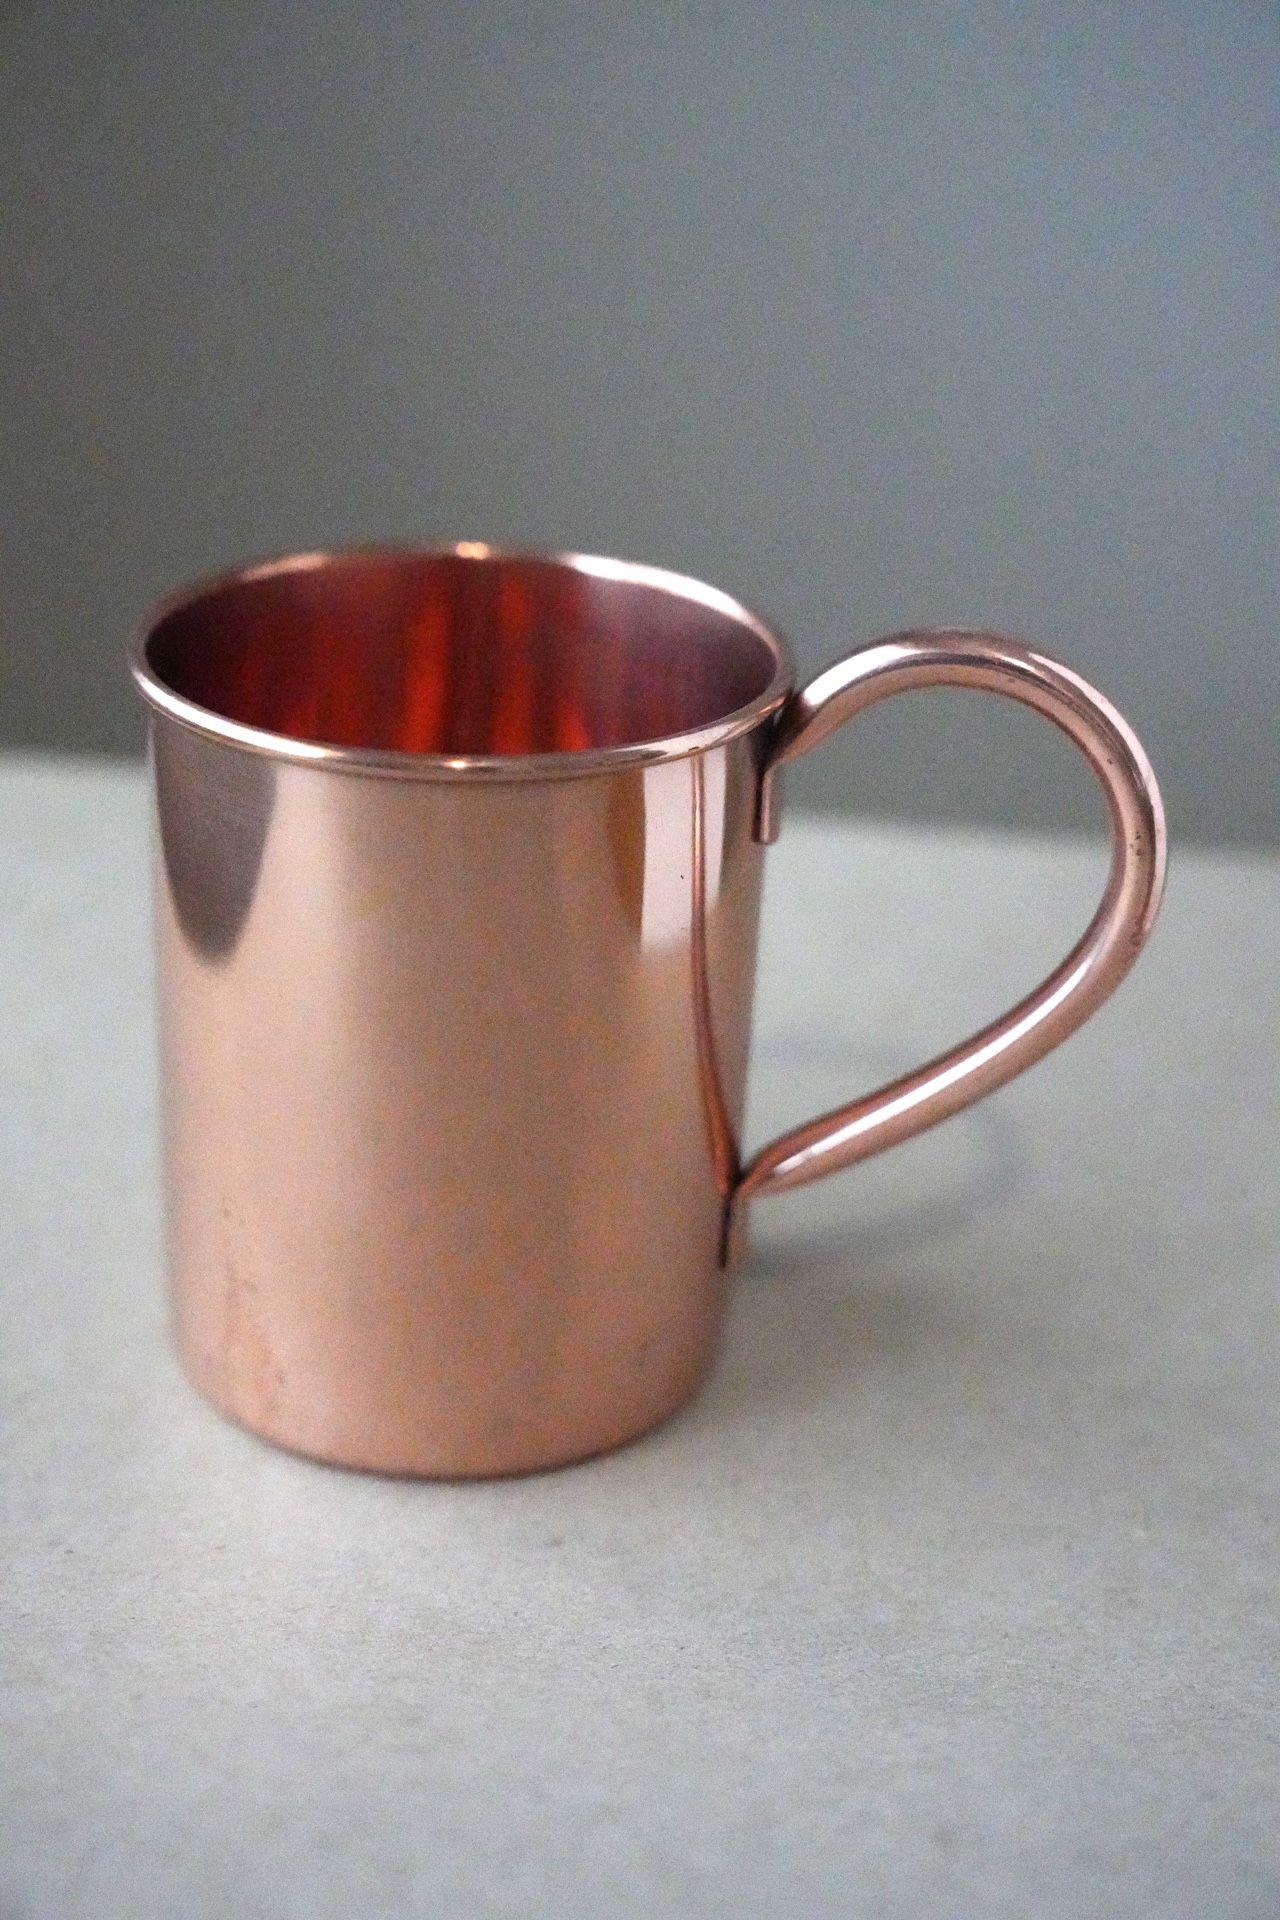 5 Moscow Copper Mule Mugs $30